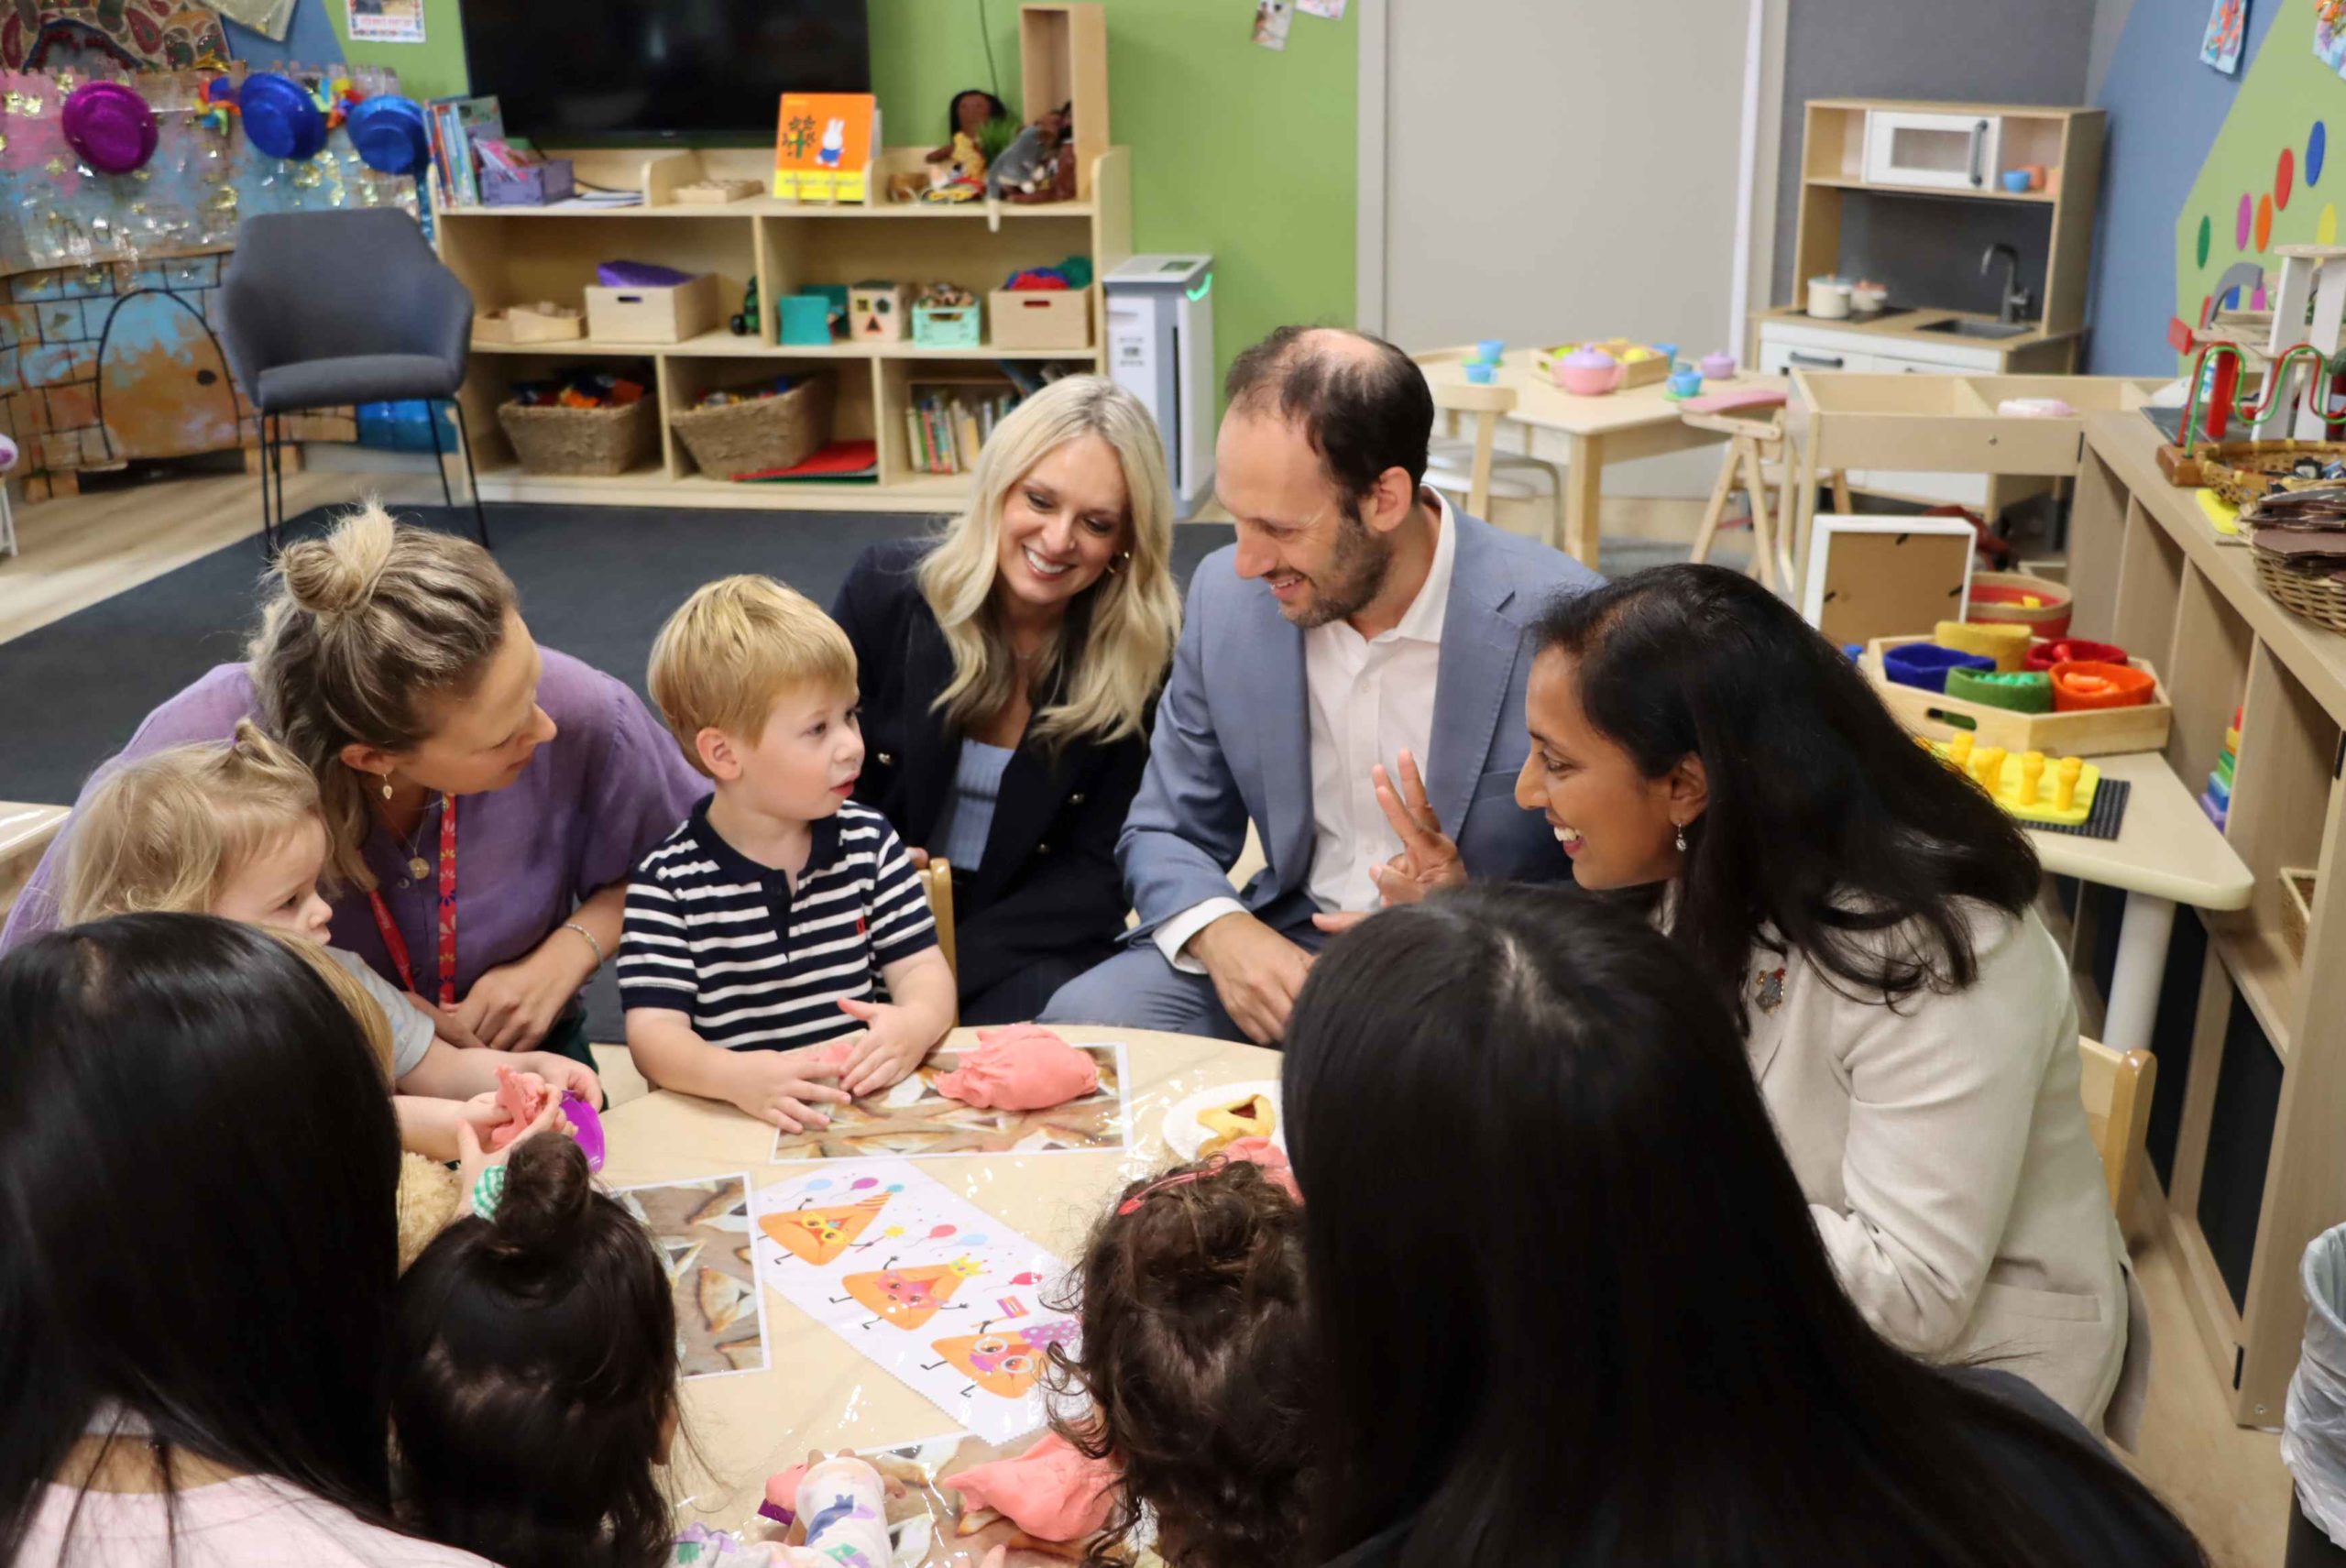 Dr Michelle Ananda-Rajah, Member for Higgins, with Principal Marc Light, Director of the ELC Marina, and teacher Amy, play with children at a table. They are celebrating the official opening of Gan Chitah, the new ELC room.